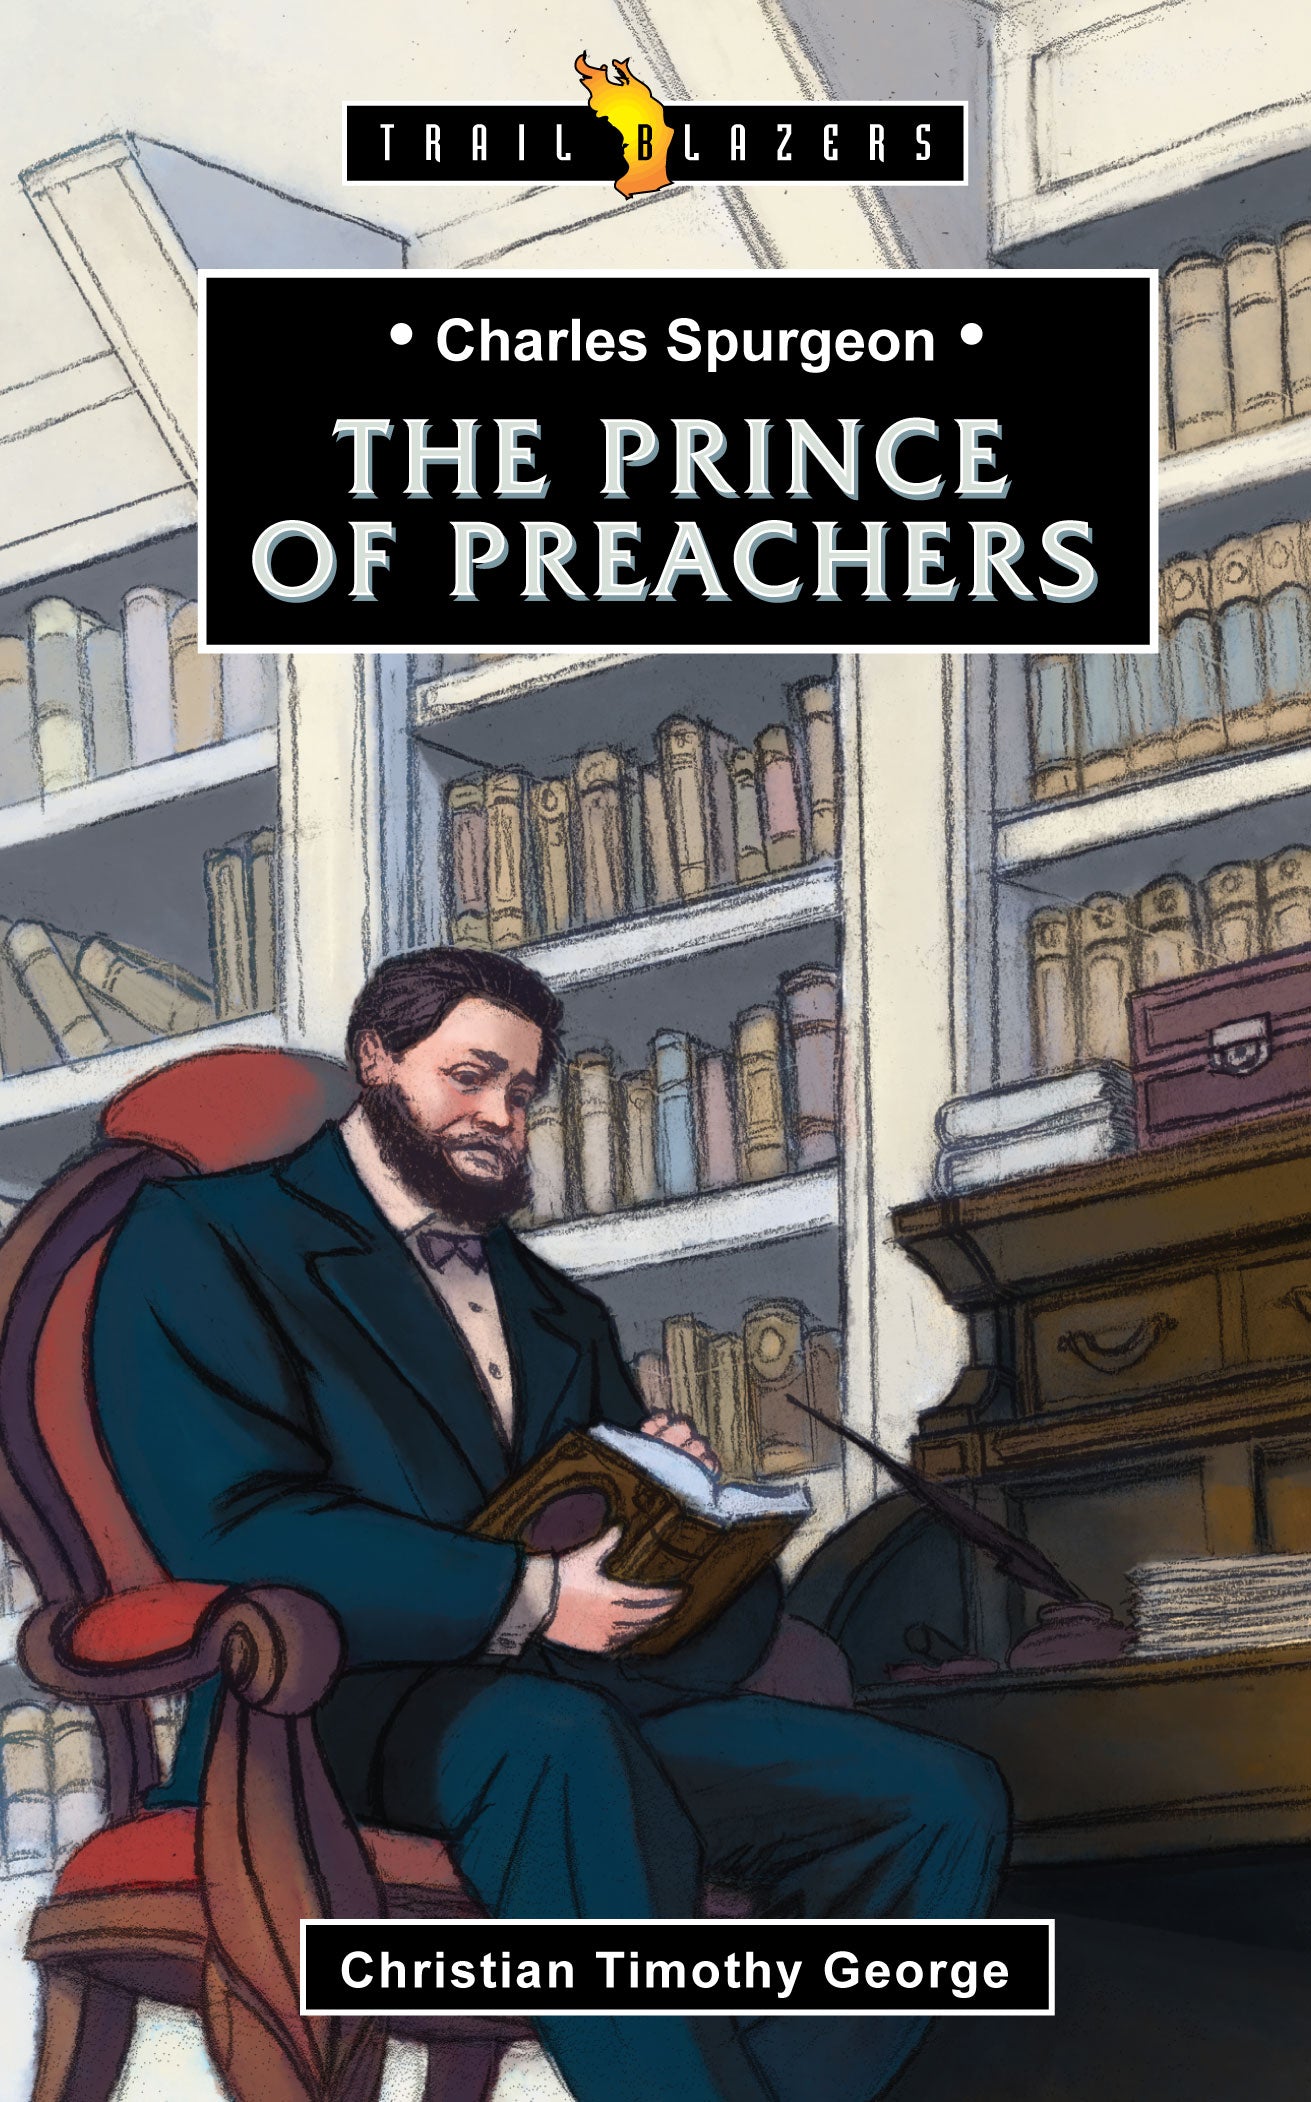 Image of Charles Spurgeon: Prince of Preachers other